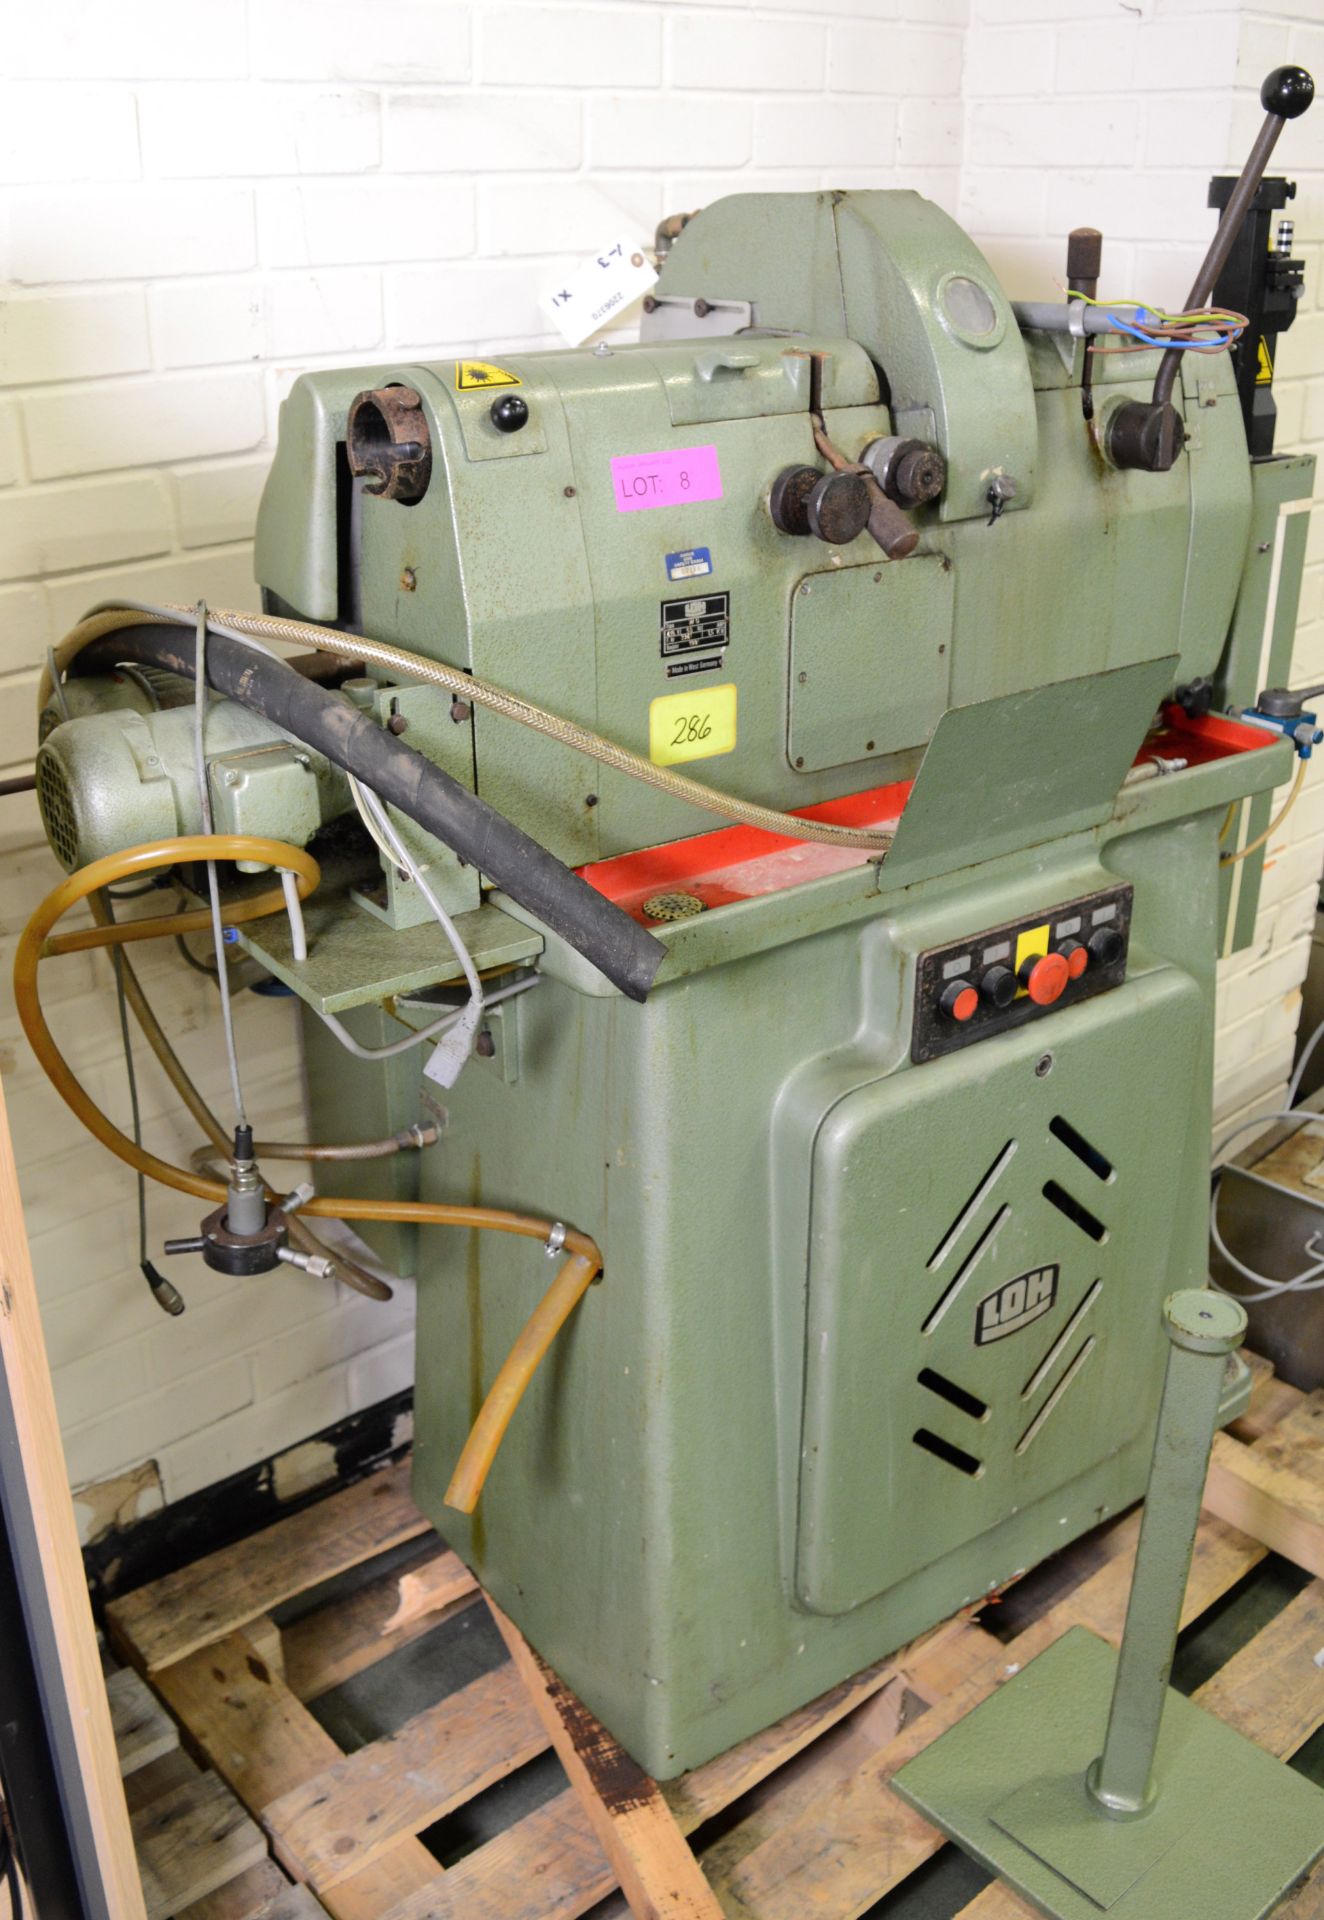 LOH Lens Grinding Machine Including Laser Centring Equipment - Image 4 of 10